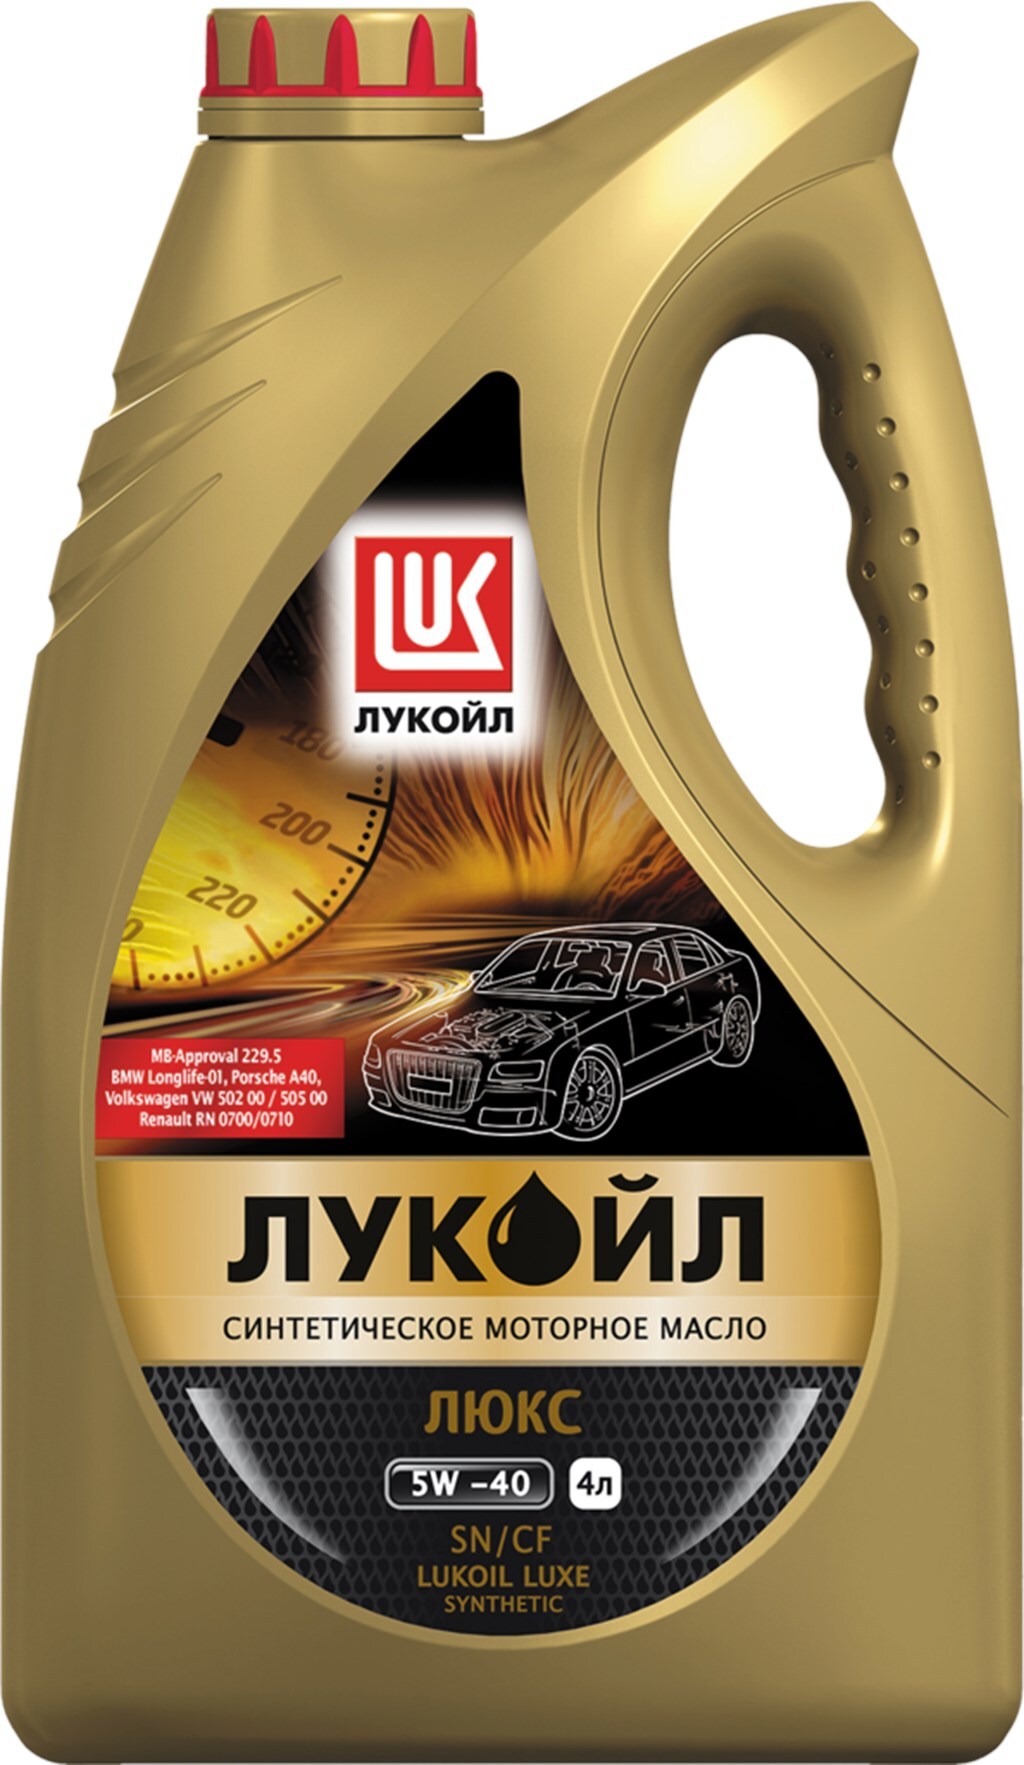 Масло моторное 5w40 api sn cf. Lukoil Luxe 5w-40. Лукойл-Люкс 5w40 4л синтетика. Лукойл Люкс 5w40 синтетика. Масло моторное Лукойл Люкс 5w40 синтетика.